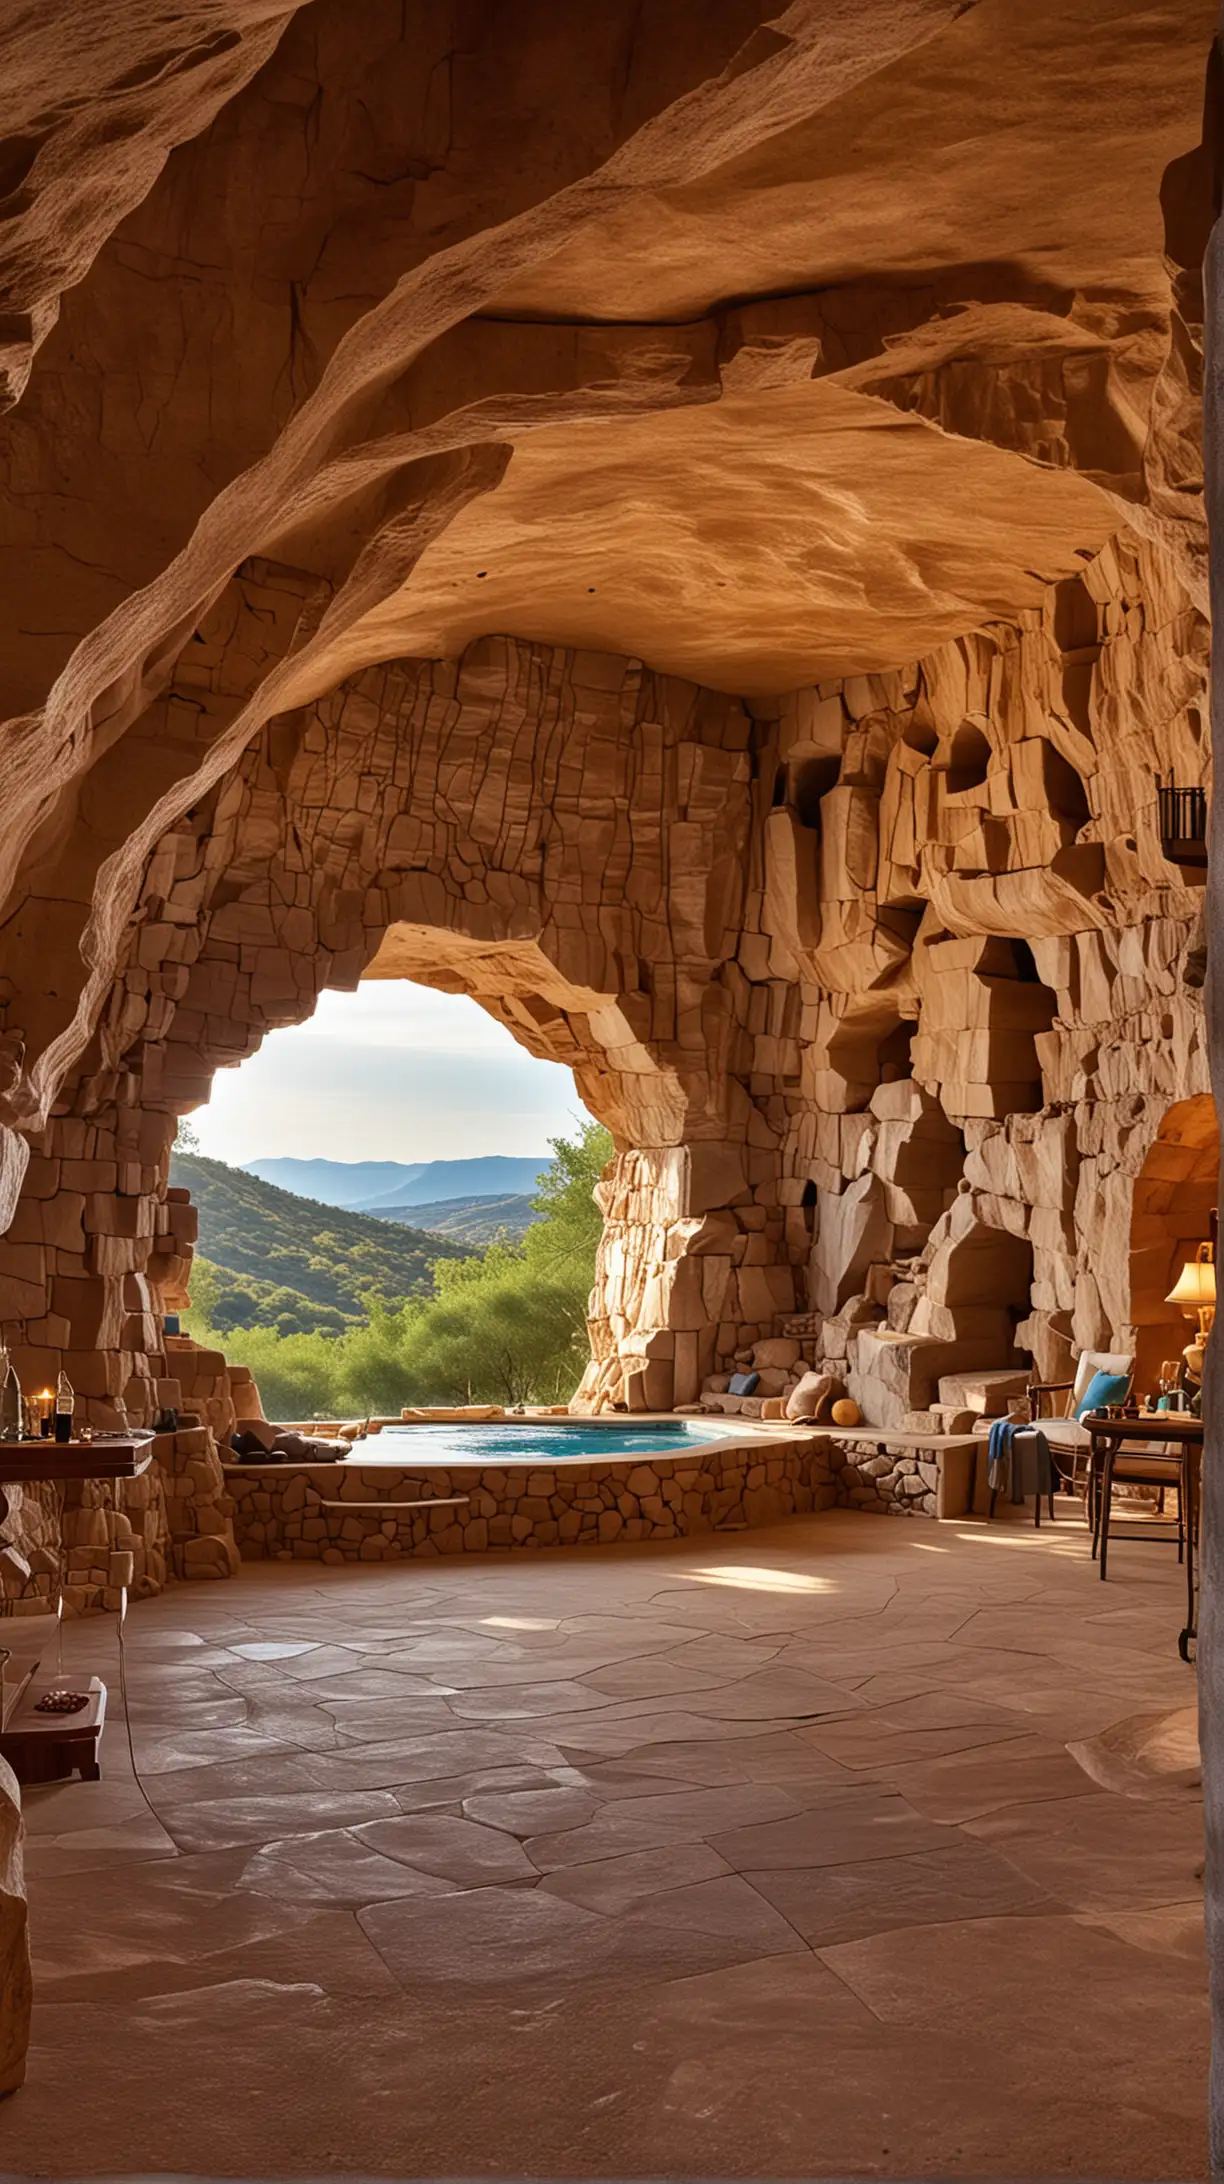 Exquisite Private Gemstone Cave Resort Immersed in Natural Luxury and Land Art Style